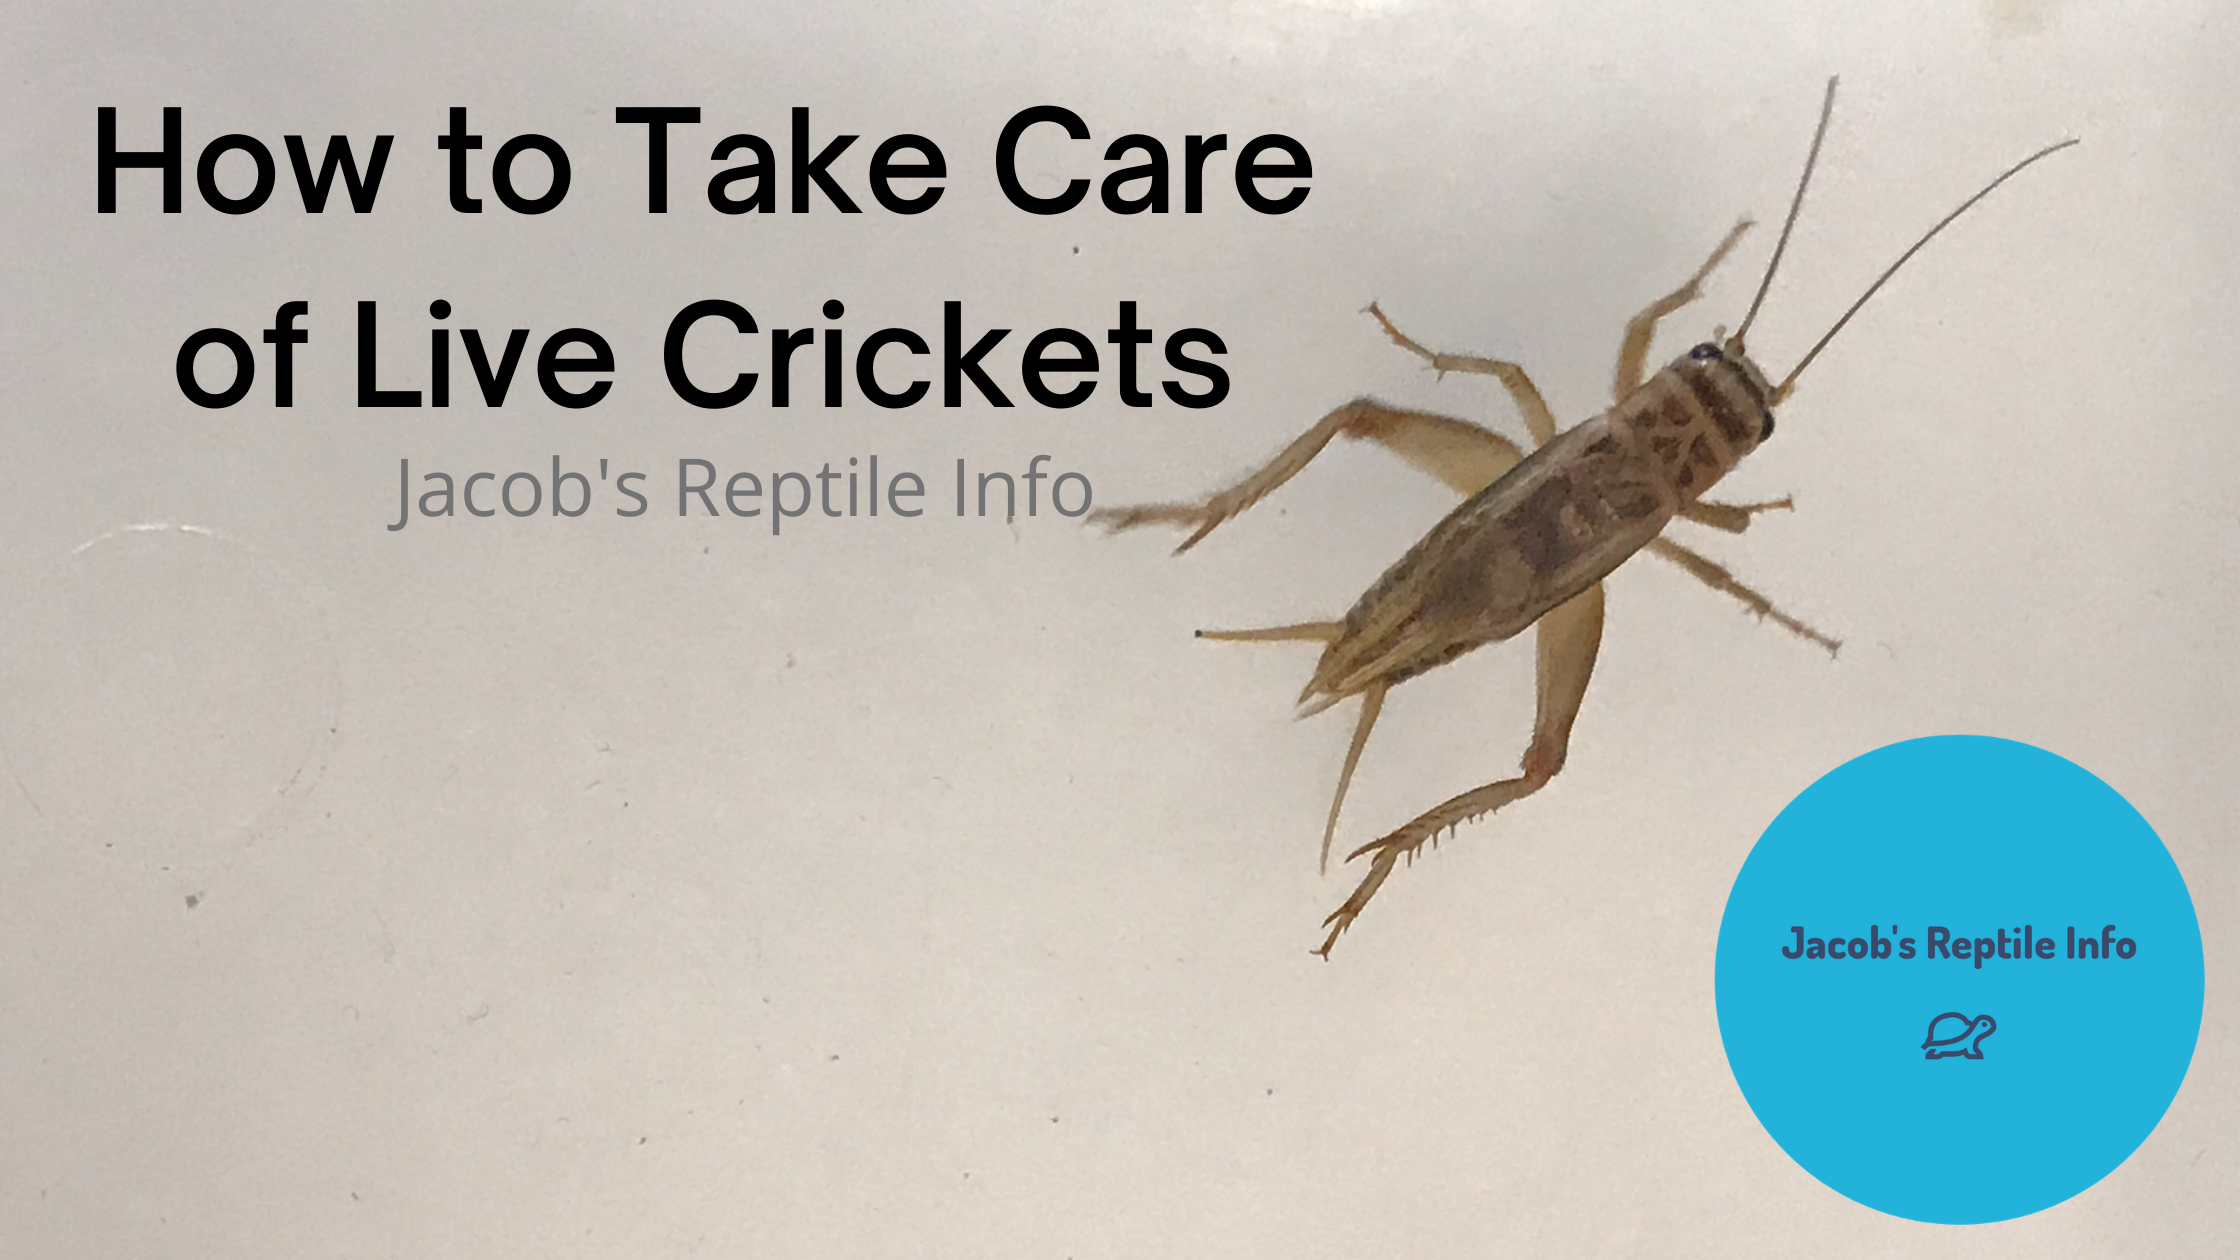 How to Take Care of Live Crickets - Jacob's Reptile Info